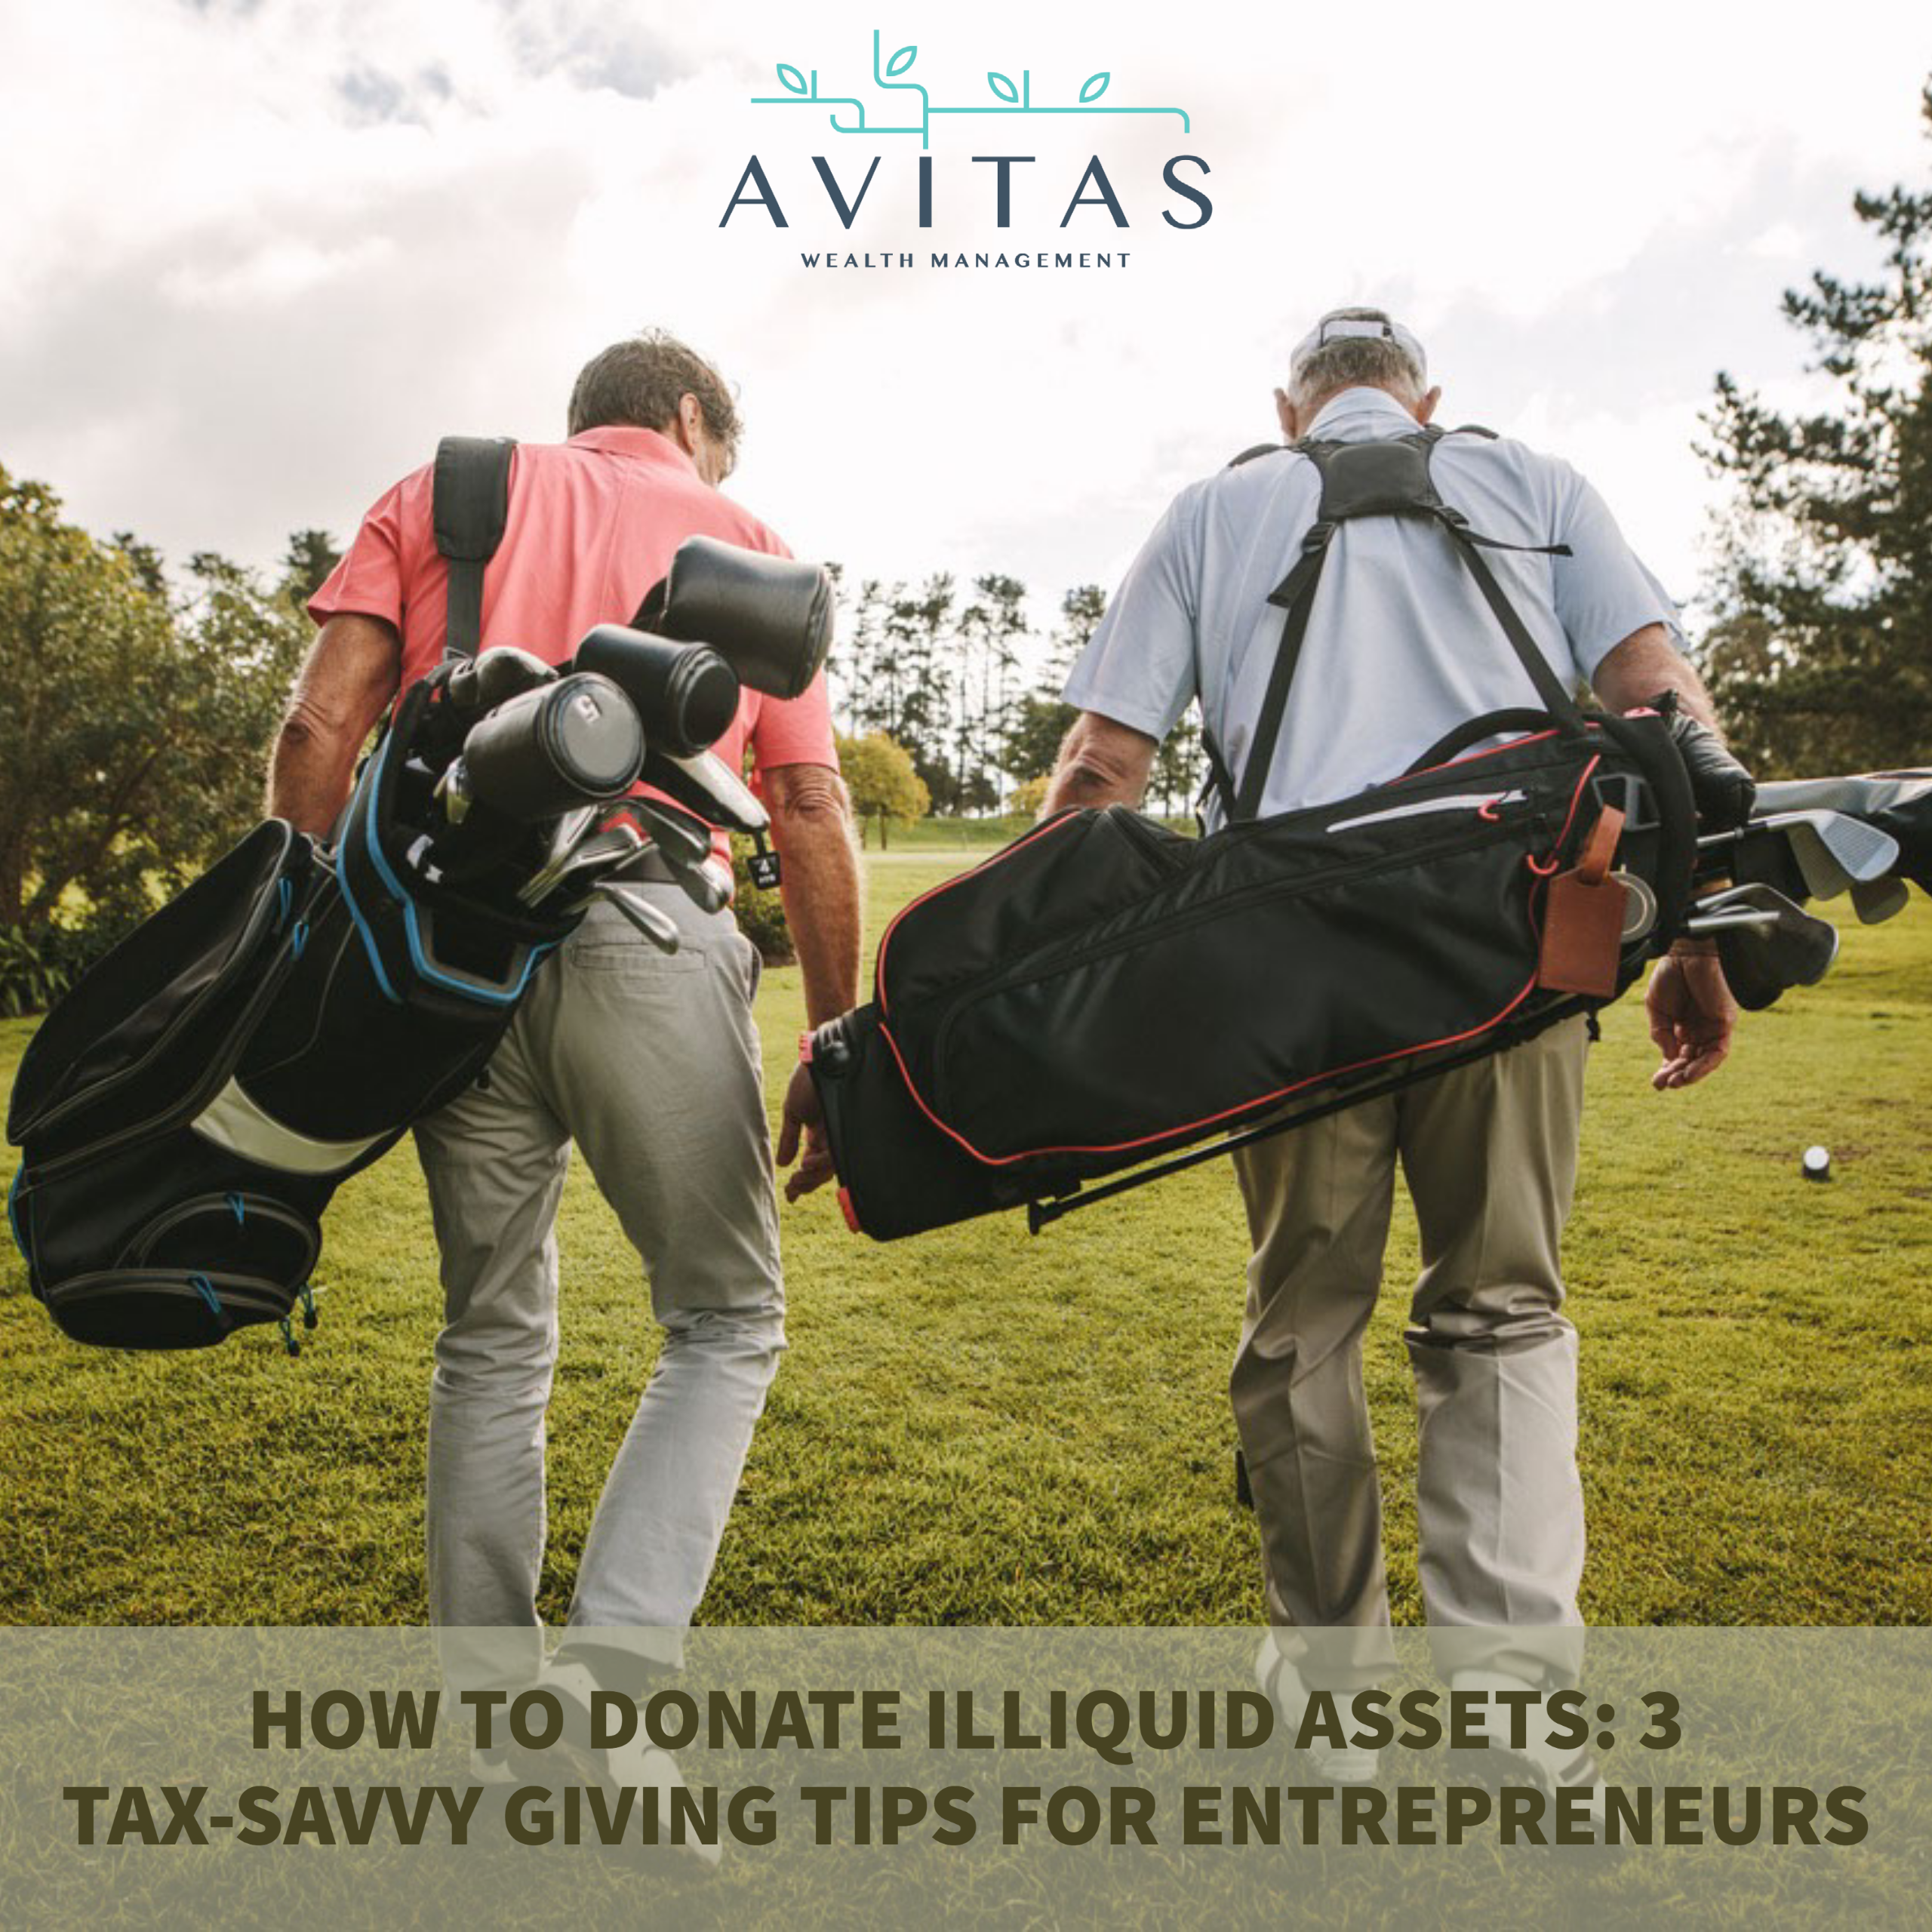 How To Donate Illiquid Assets: 3 Tax-Savvy Giving Tips For Entrepreneurs